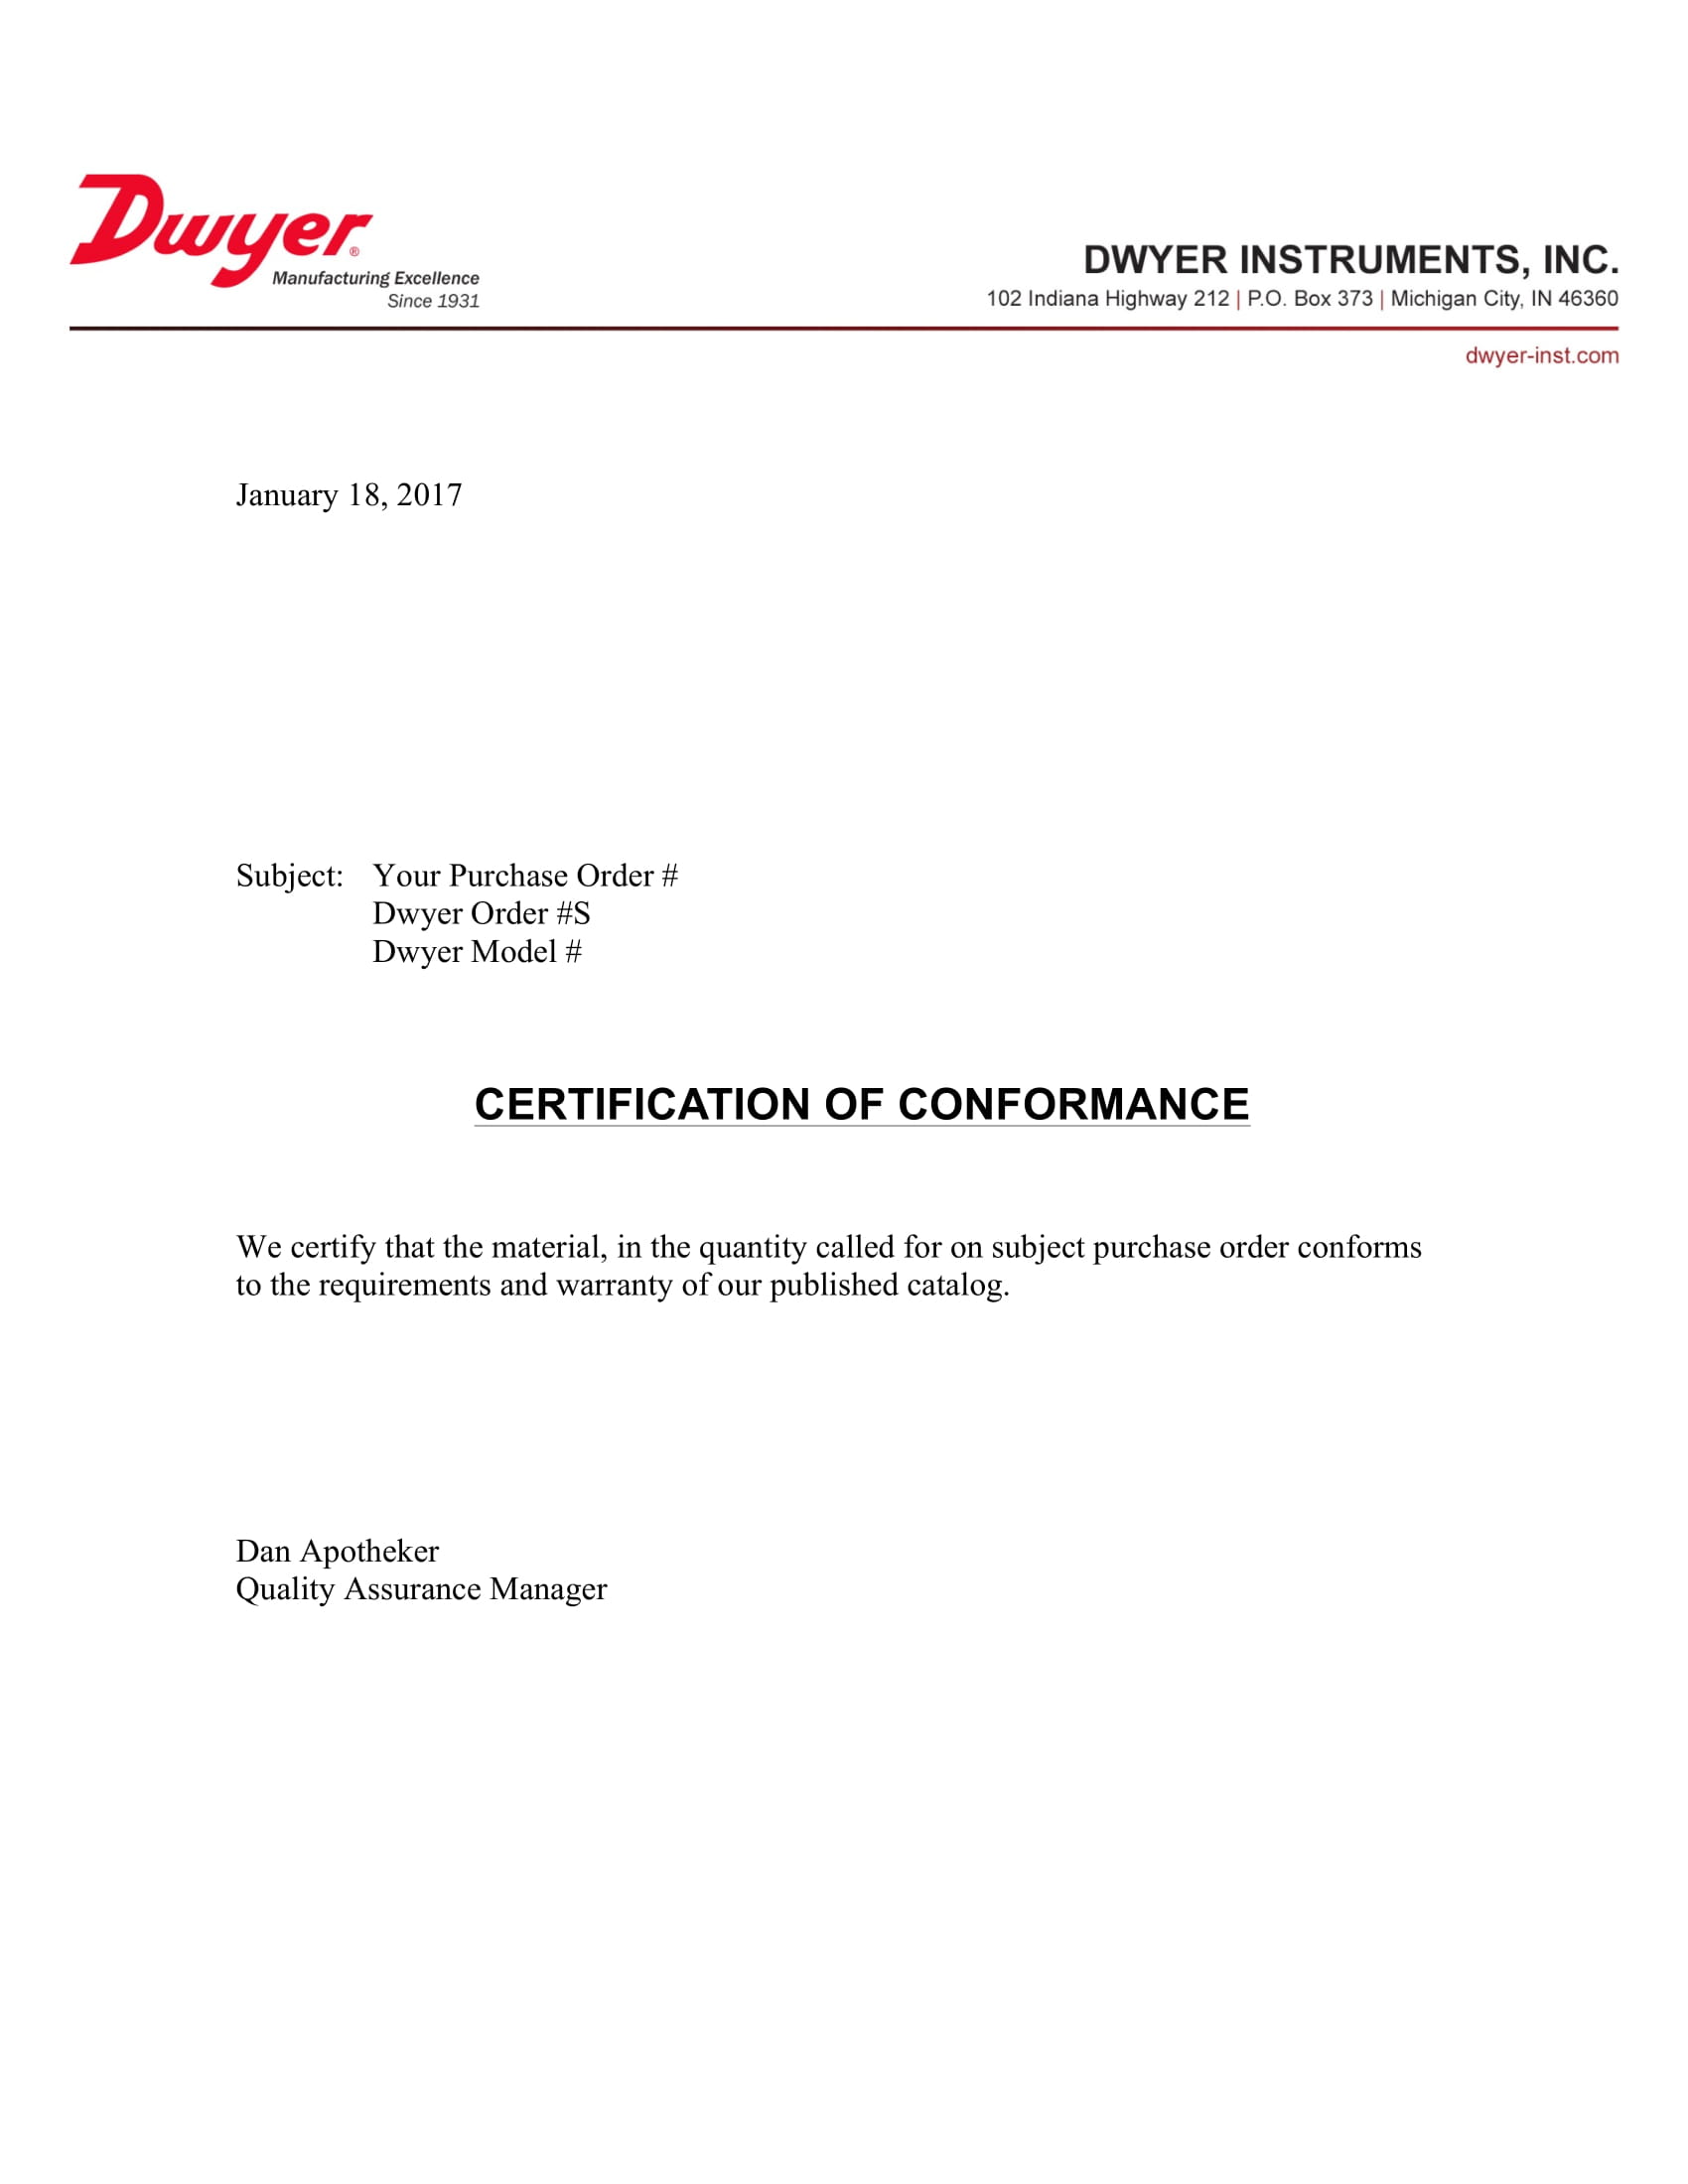 Certificate of Conformance 16  Examples Format Pdf